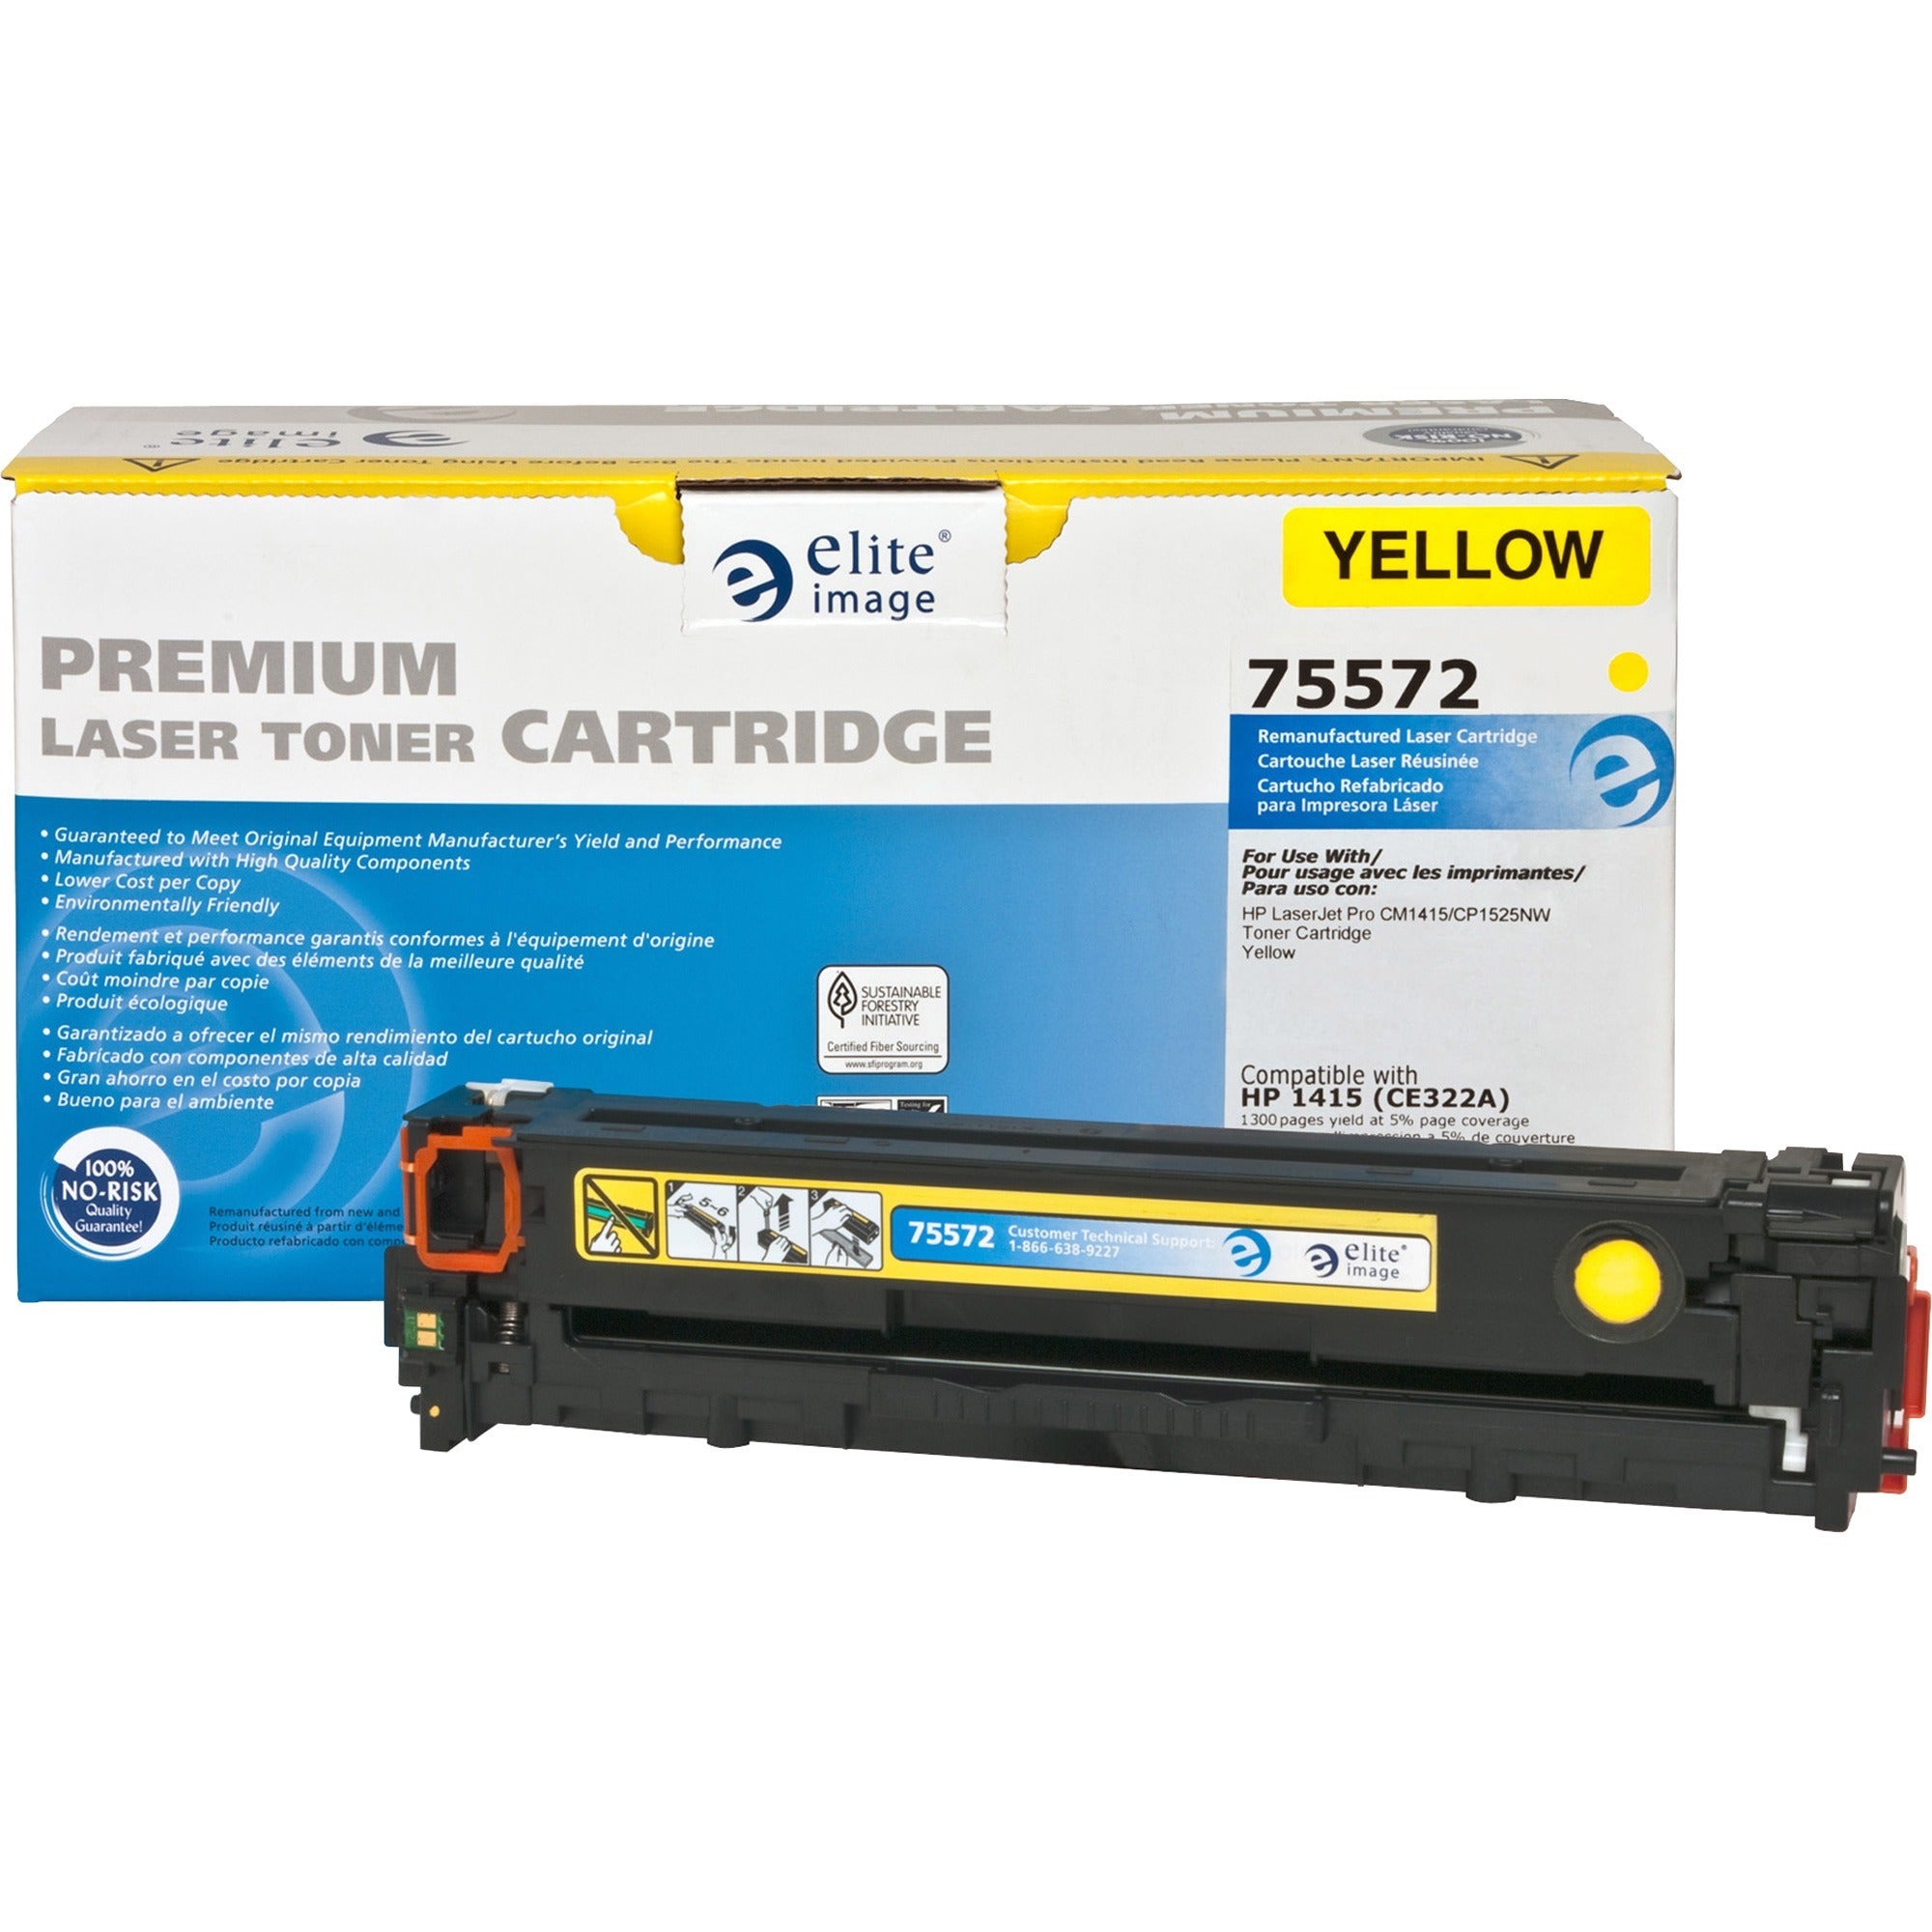 Elite Image Remanufactured Laser Toner Cartridge - Alternative for HP 128A (CE322A) - Yellow - 1 Each - 1300 Pages - 1